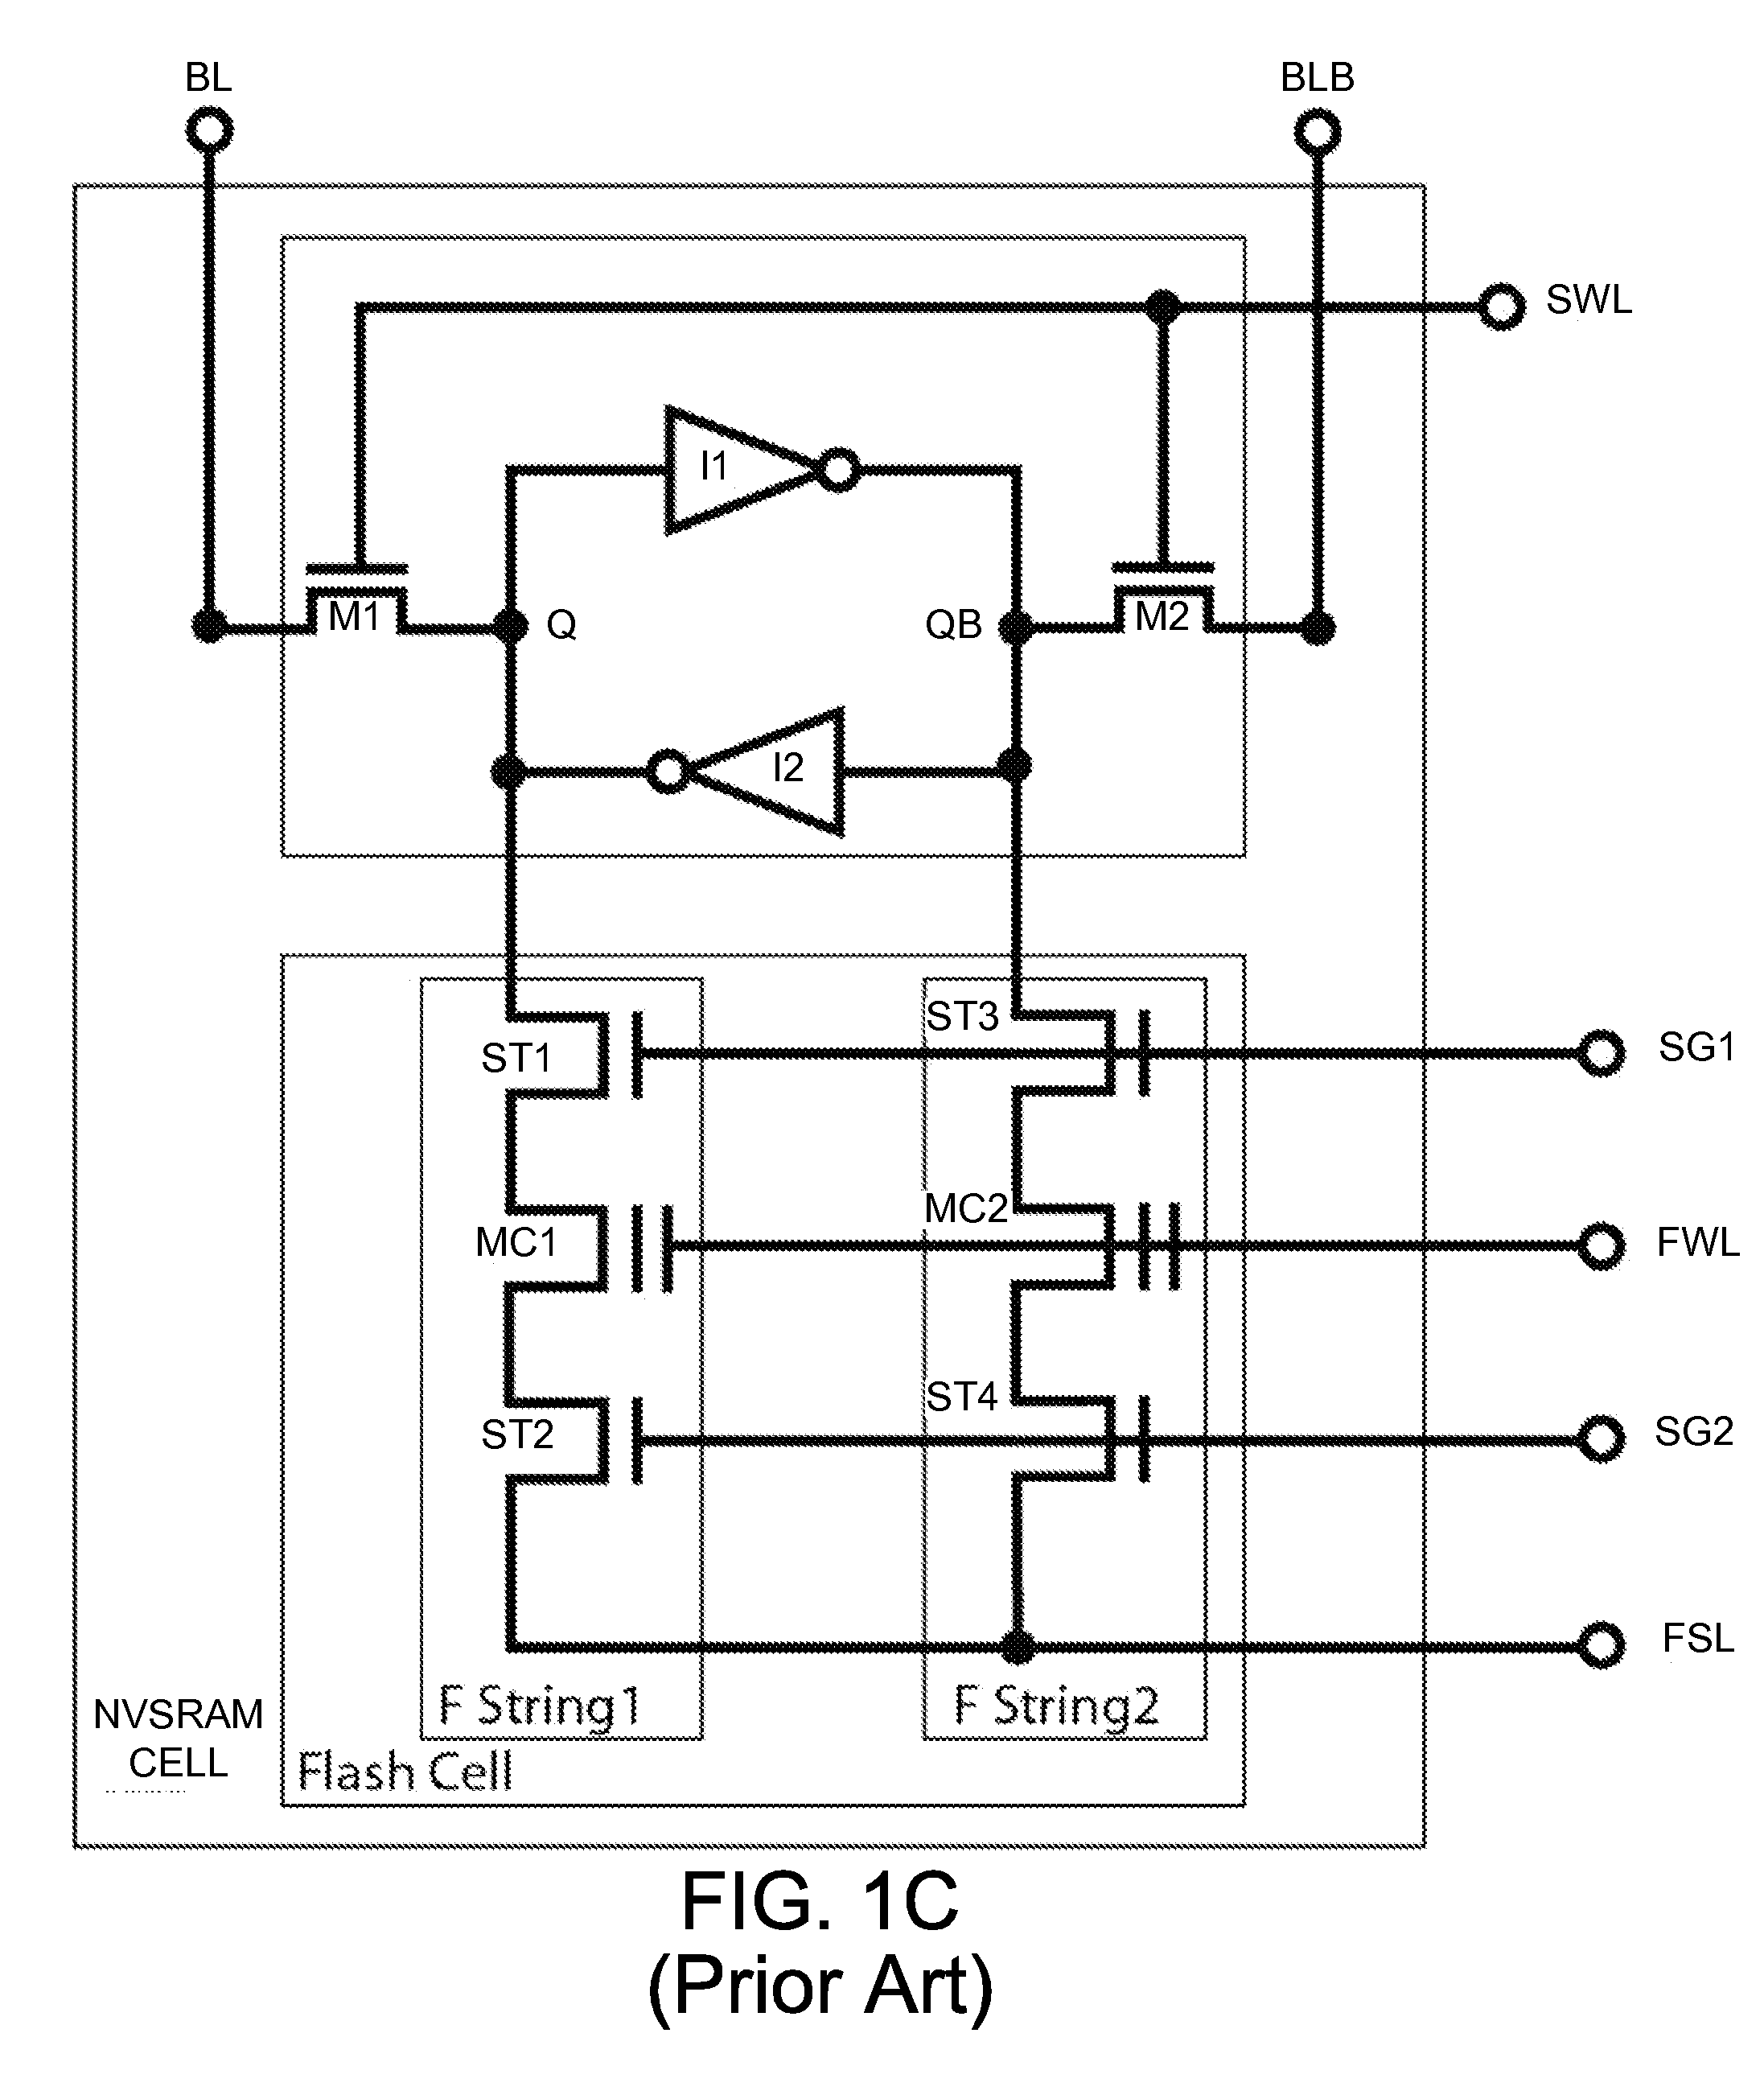 Low-voltage fast-write PMOS NVSRAM cell